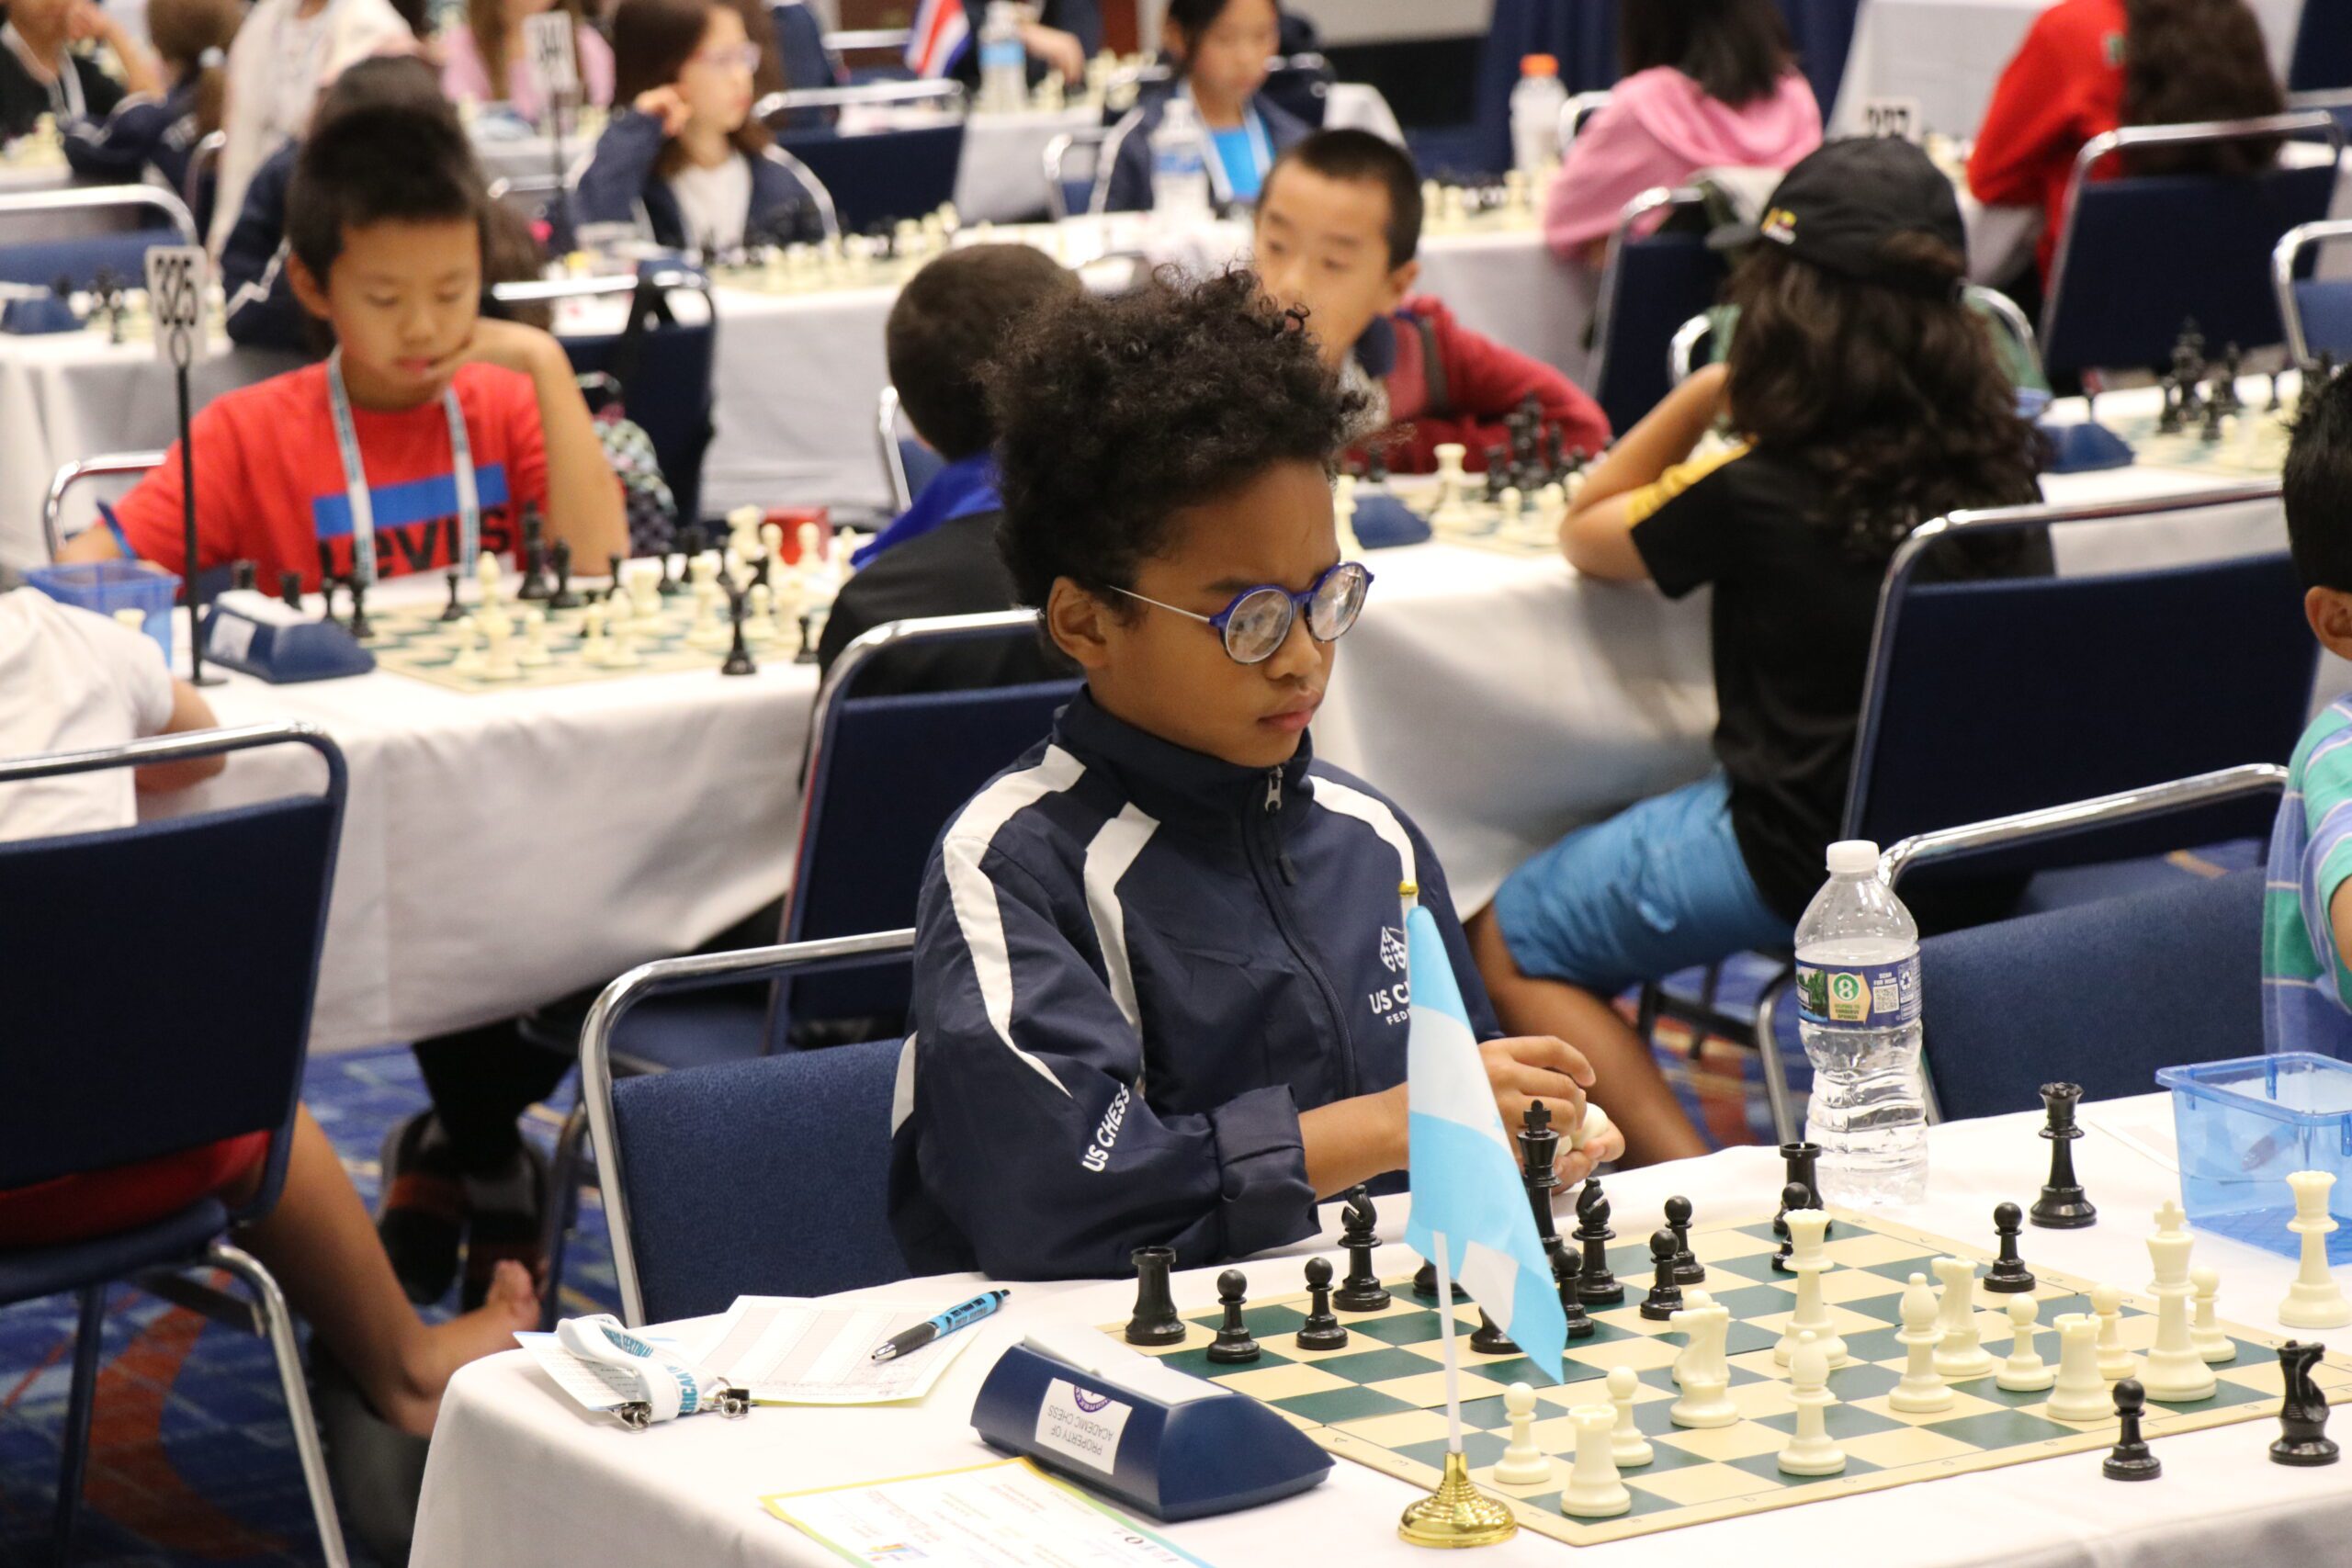 Game Highlights From XXXIII Pan-American Youth Chess Festival